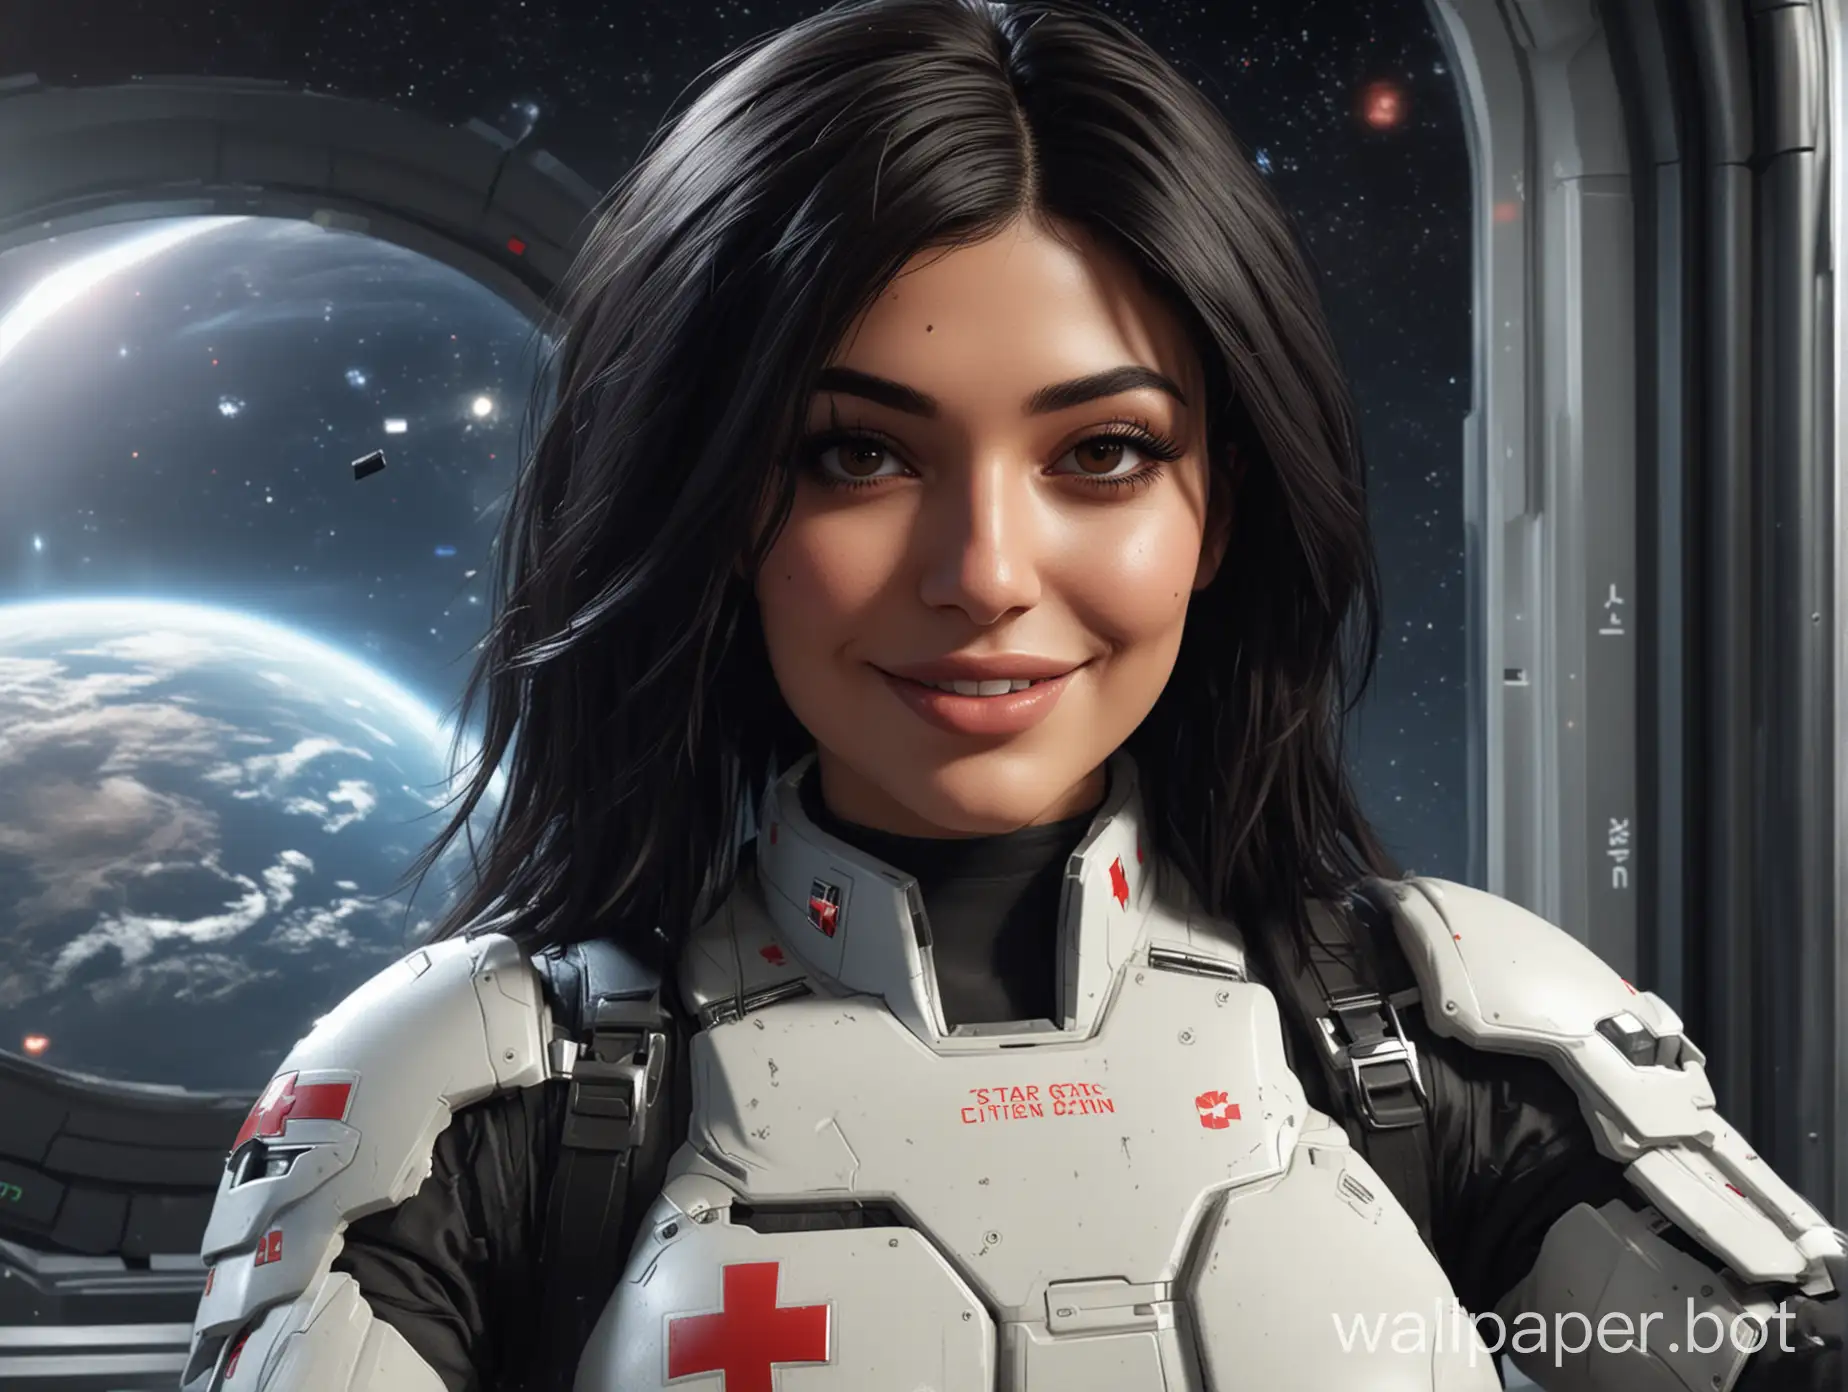 Star Citizen Universe, female with Kylie Jenner face taking selfie of herself,  Science-Fiction,  Medic, red cross, first aid , curvy female body shape, stars and planet through a window in the background, black shoulder long hair, natural black eyes, open smiling with showing teeth